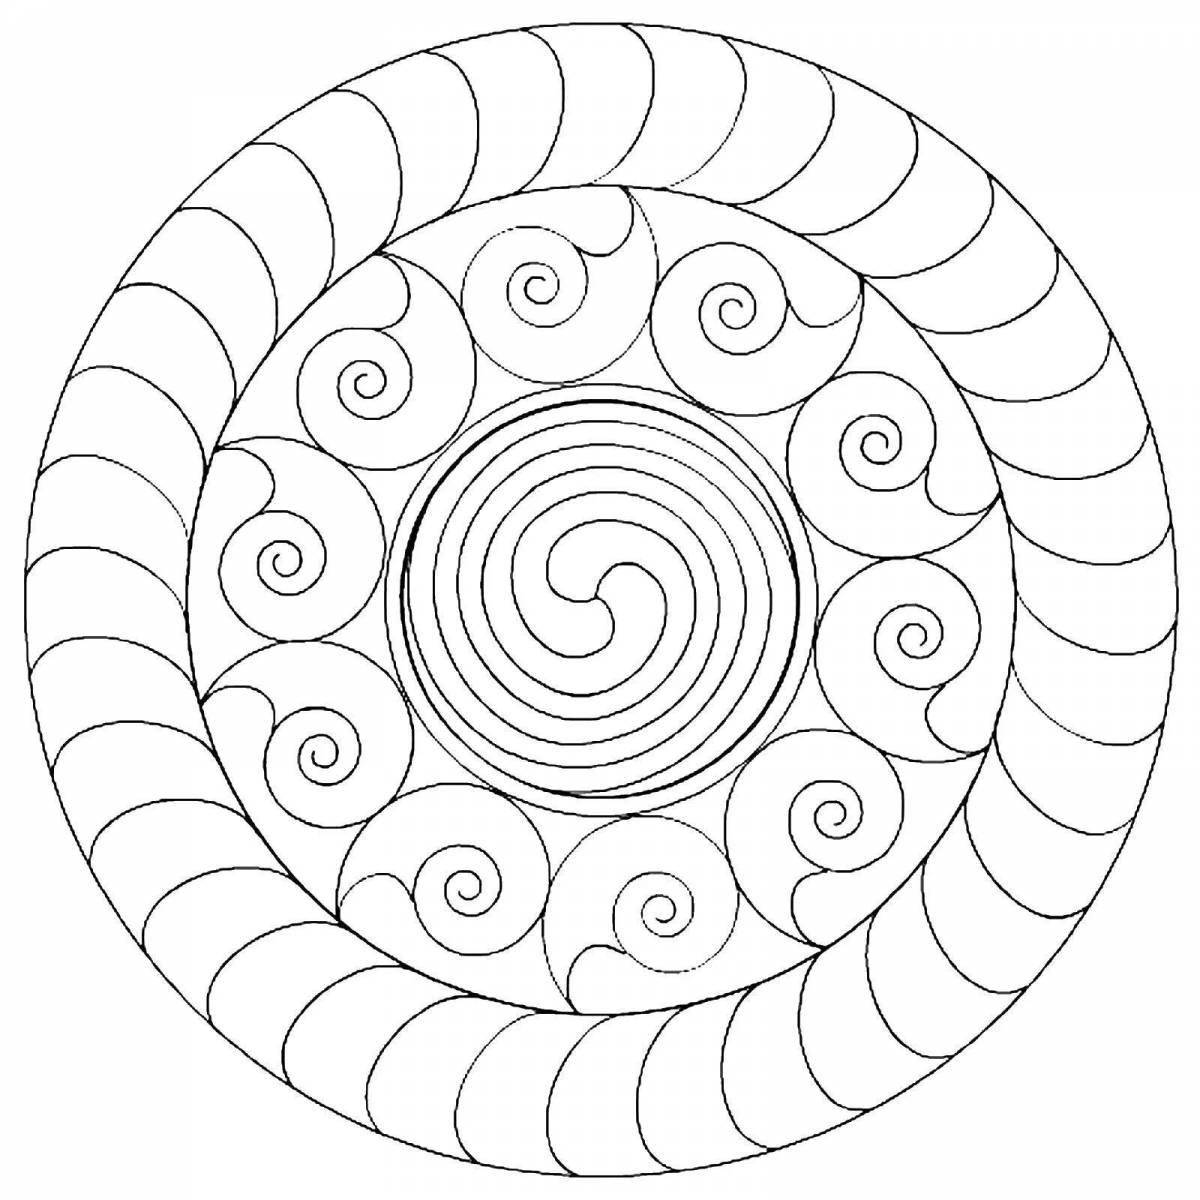 How to make spiral coloring #10